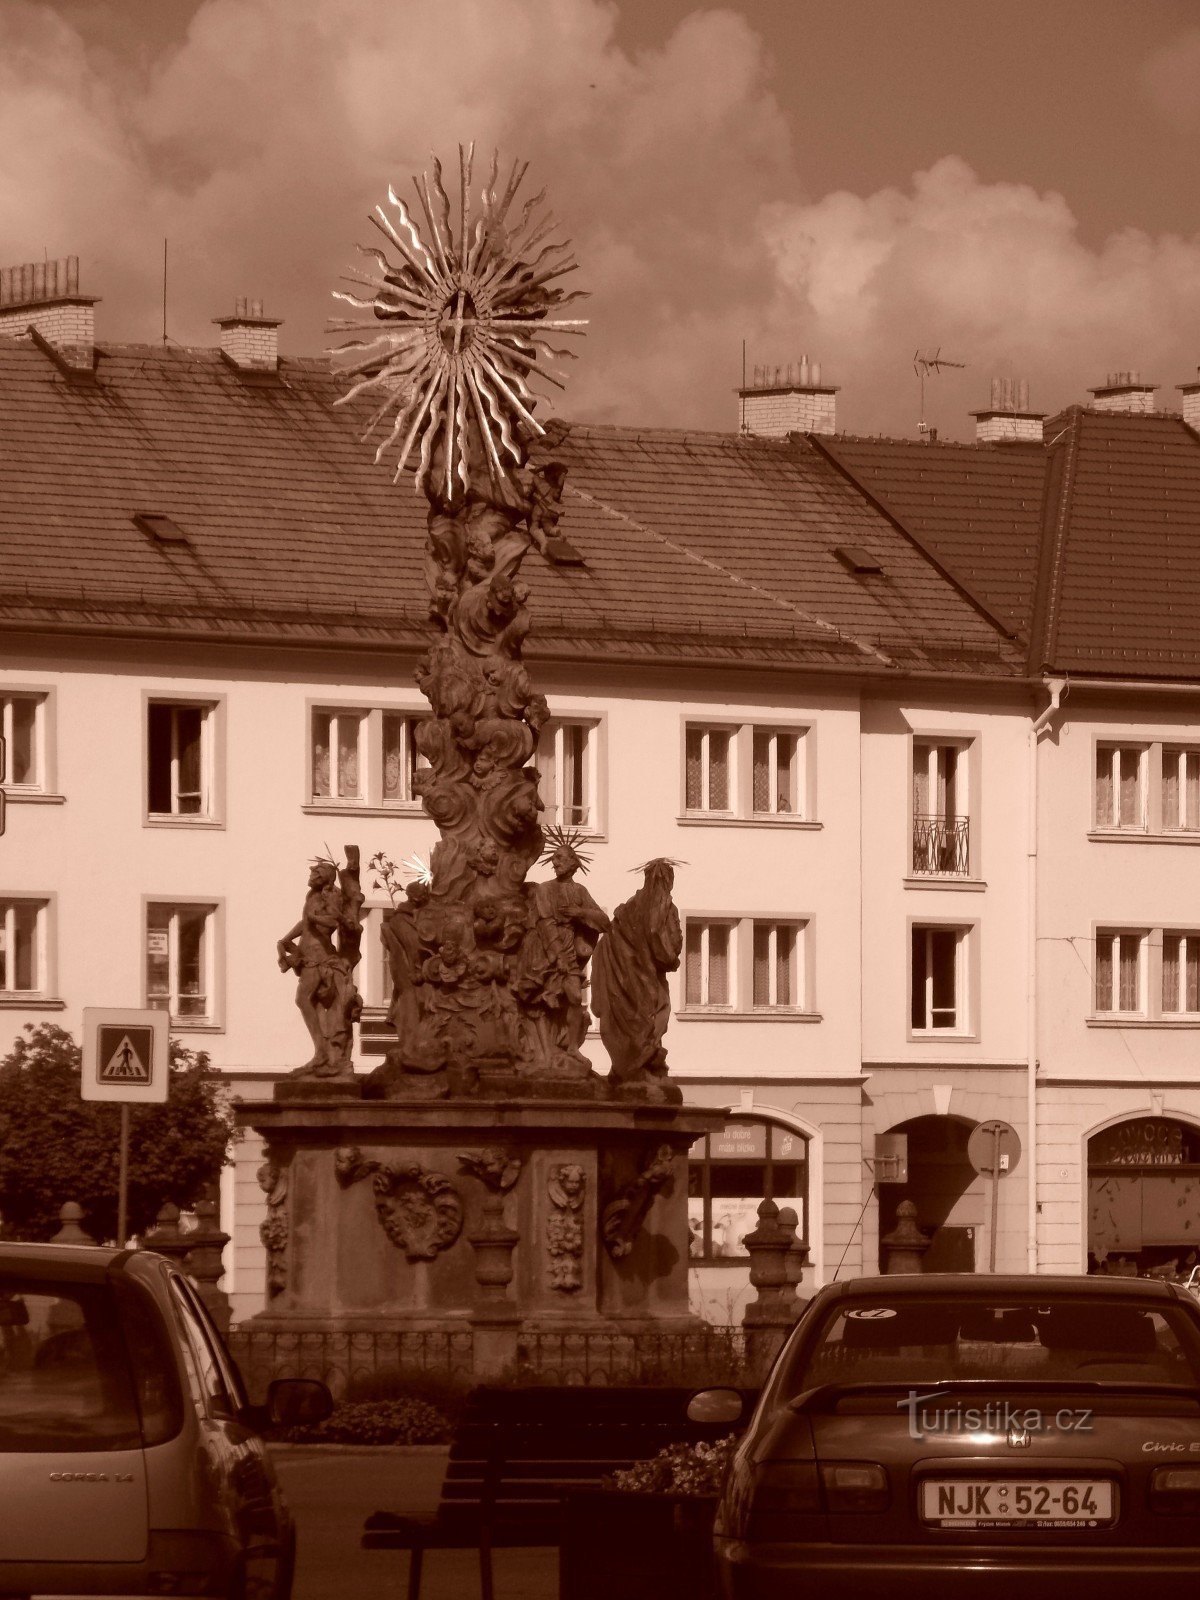 fountain with a statue of St. John Sarkander